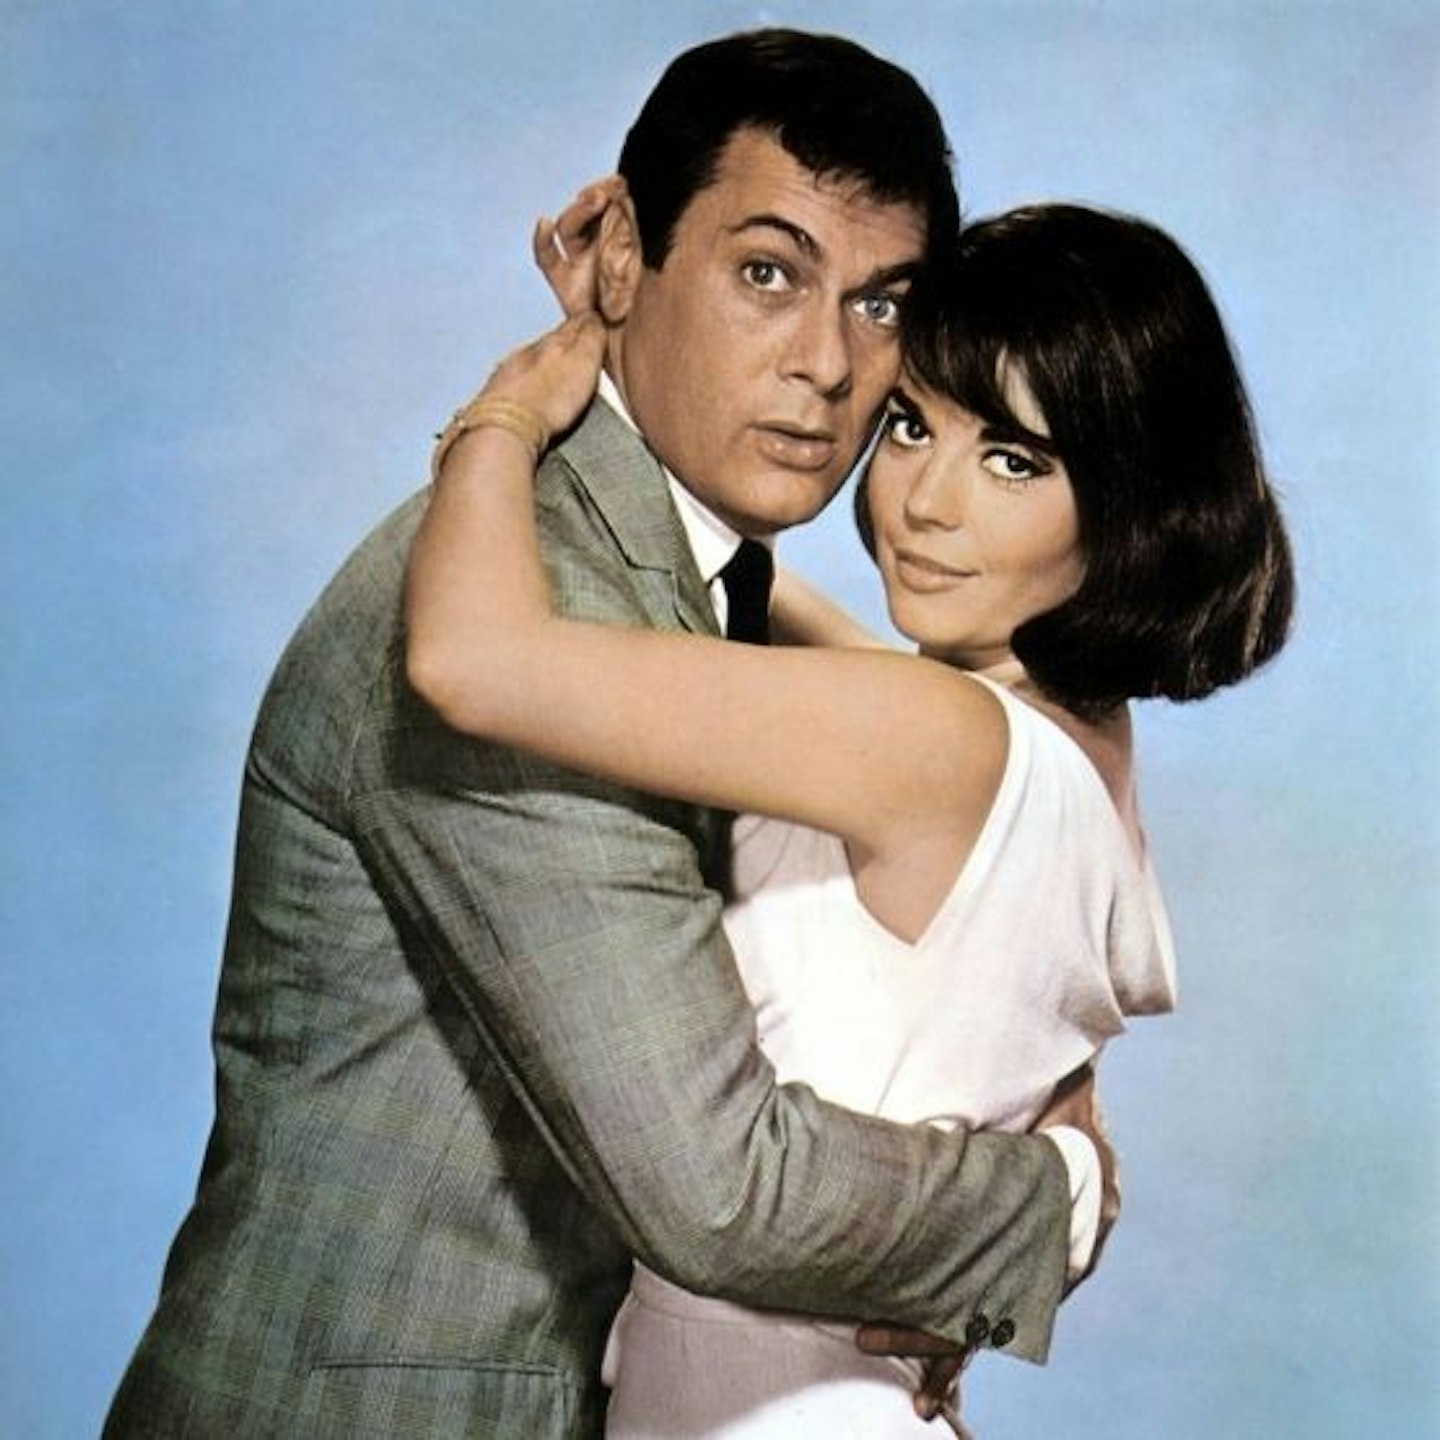 Natalie-Wood and Tony-Curtis